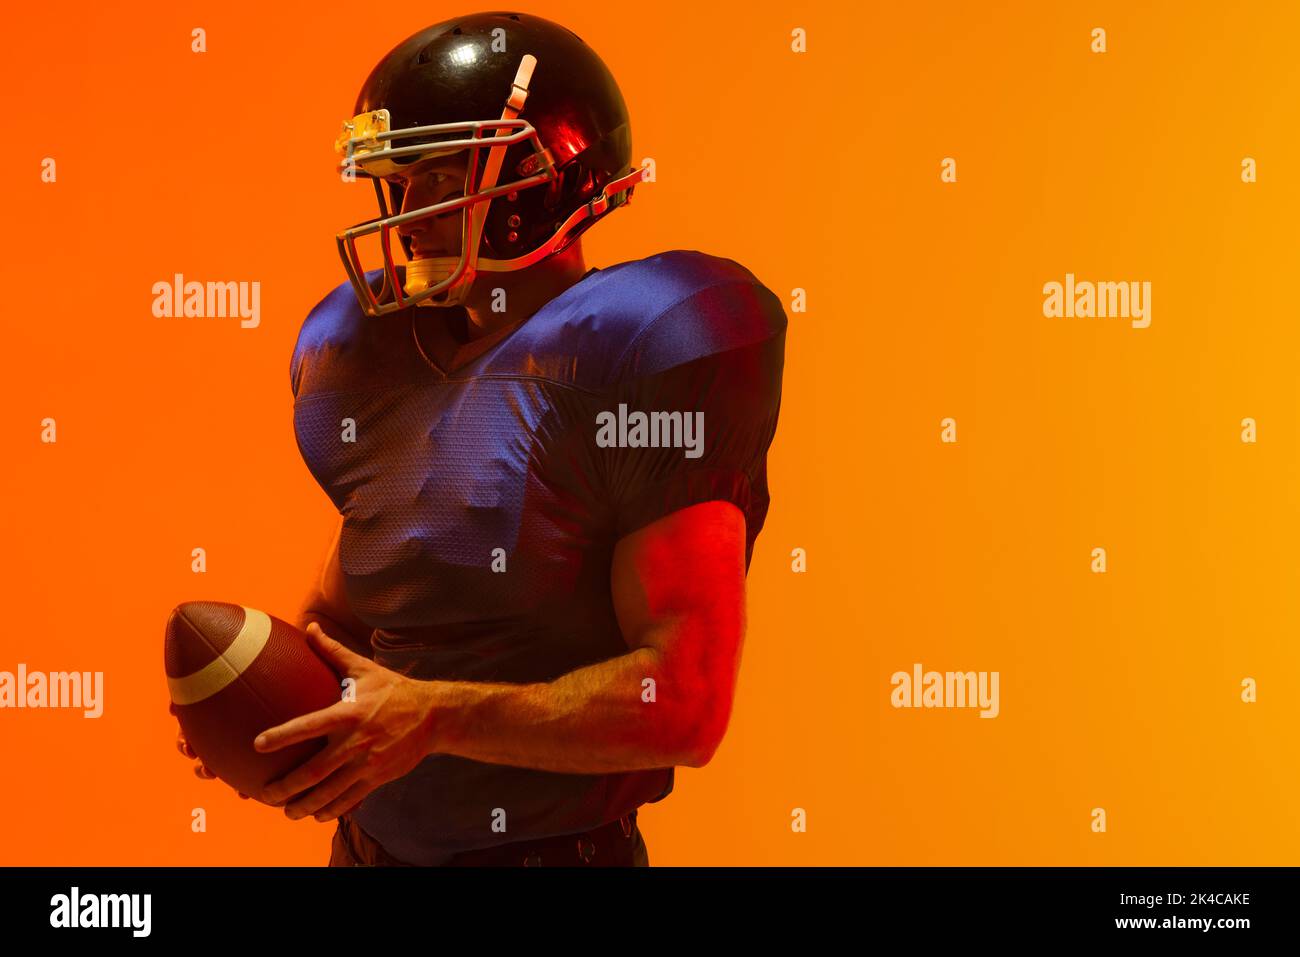 Caucasian male american football player holding ball with neon orange lighting. Sport, movement, training and active lifestyle concept. Stock Photo